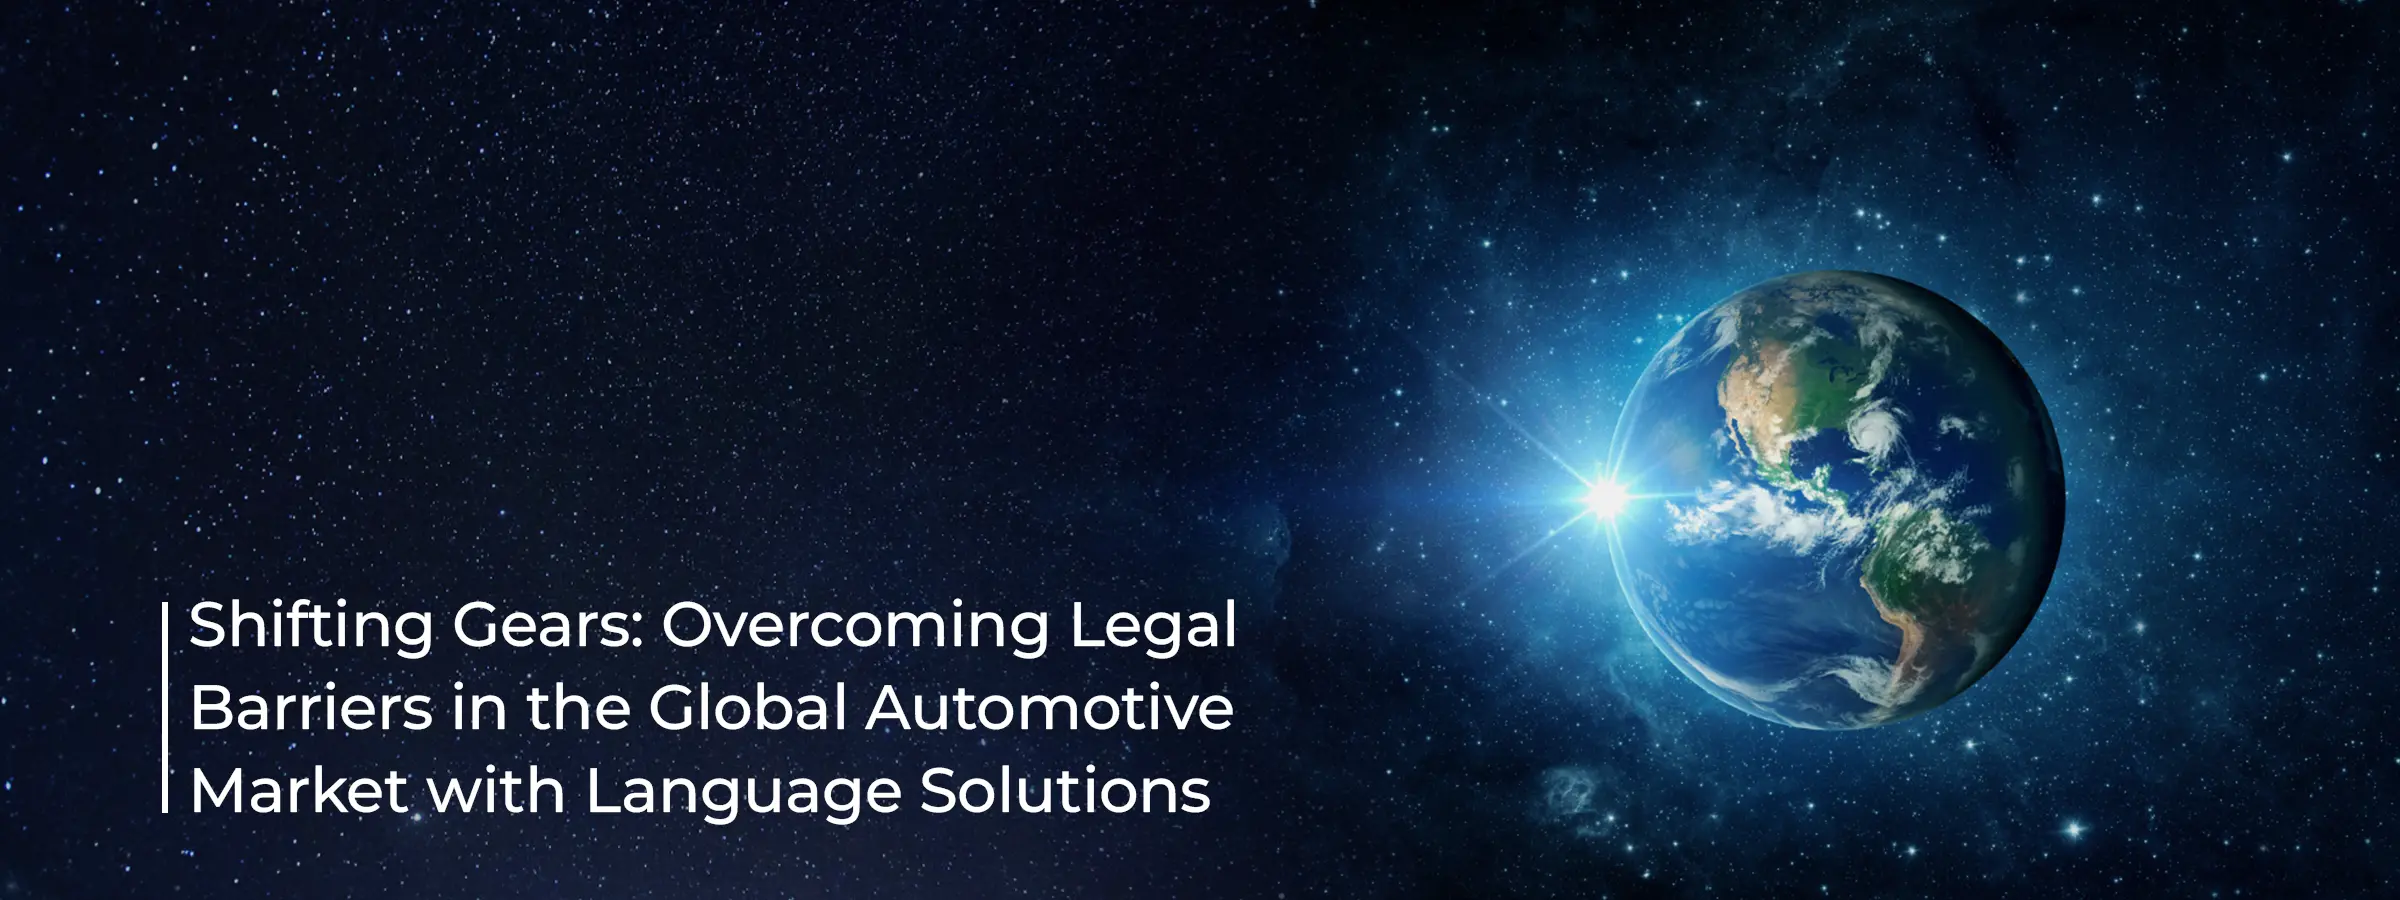 legal-barriers-in-the-global-automotive-market-with-language-solutions